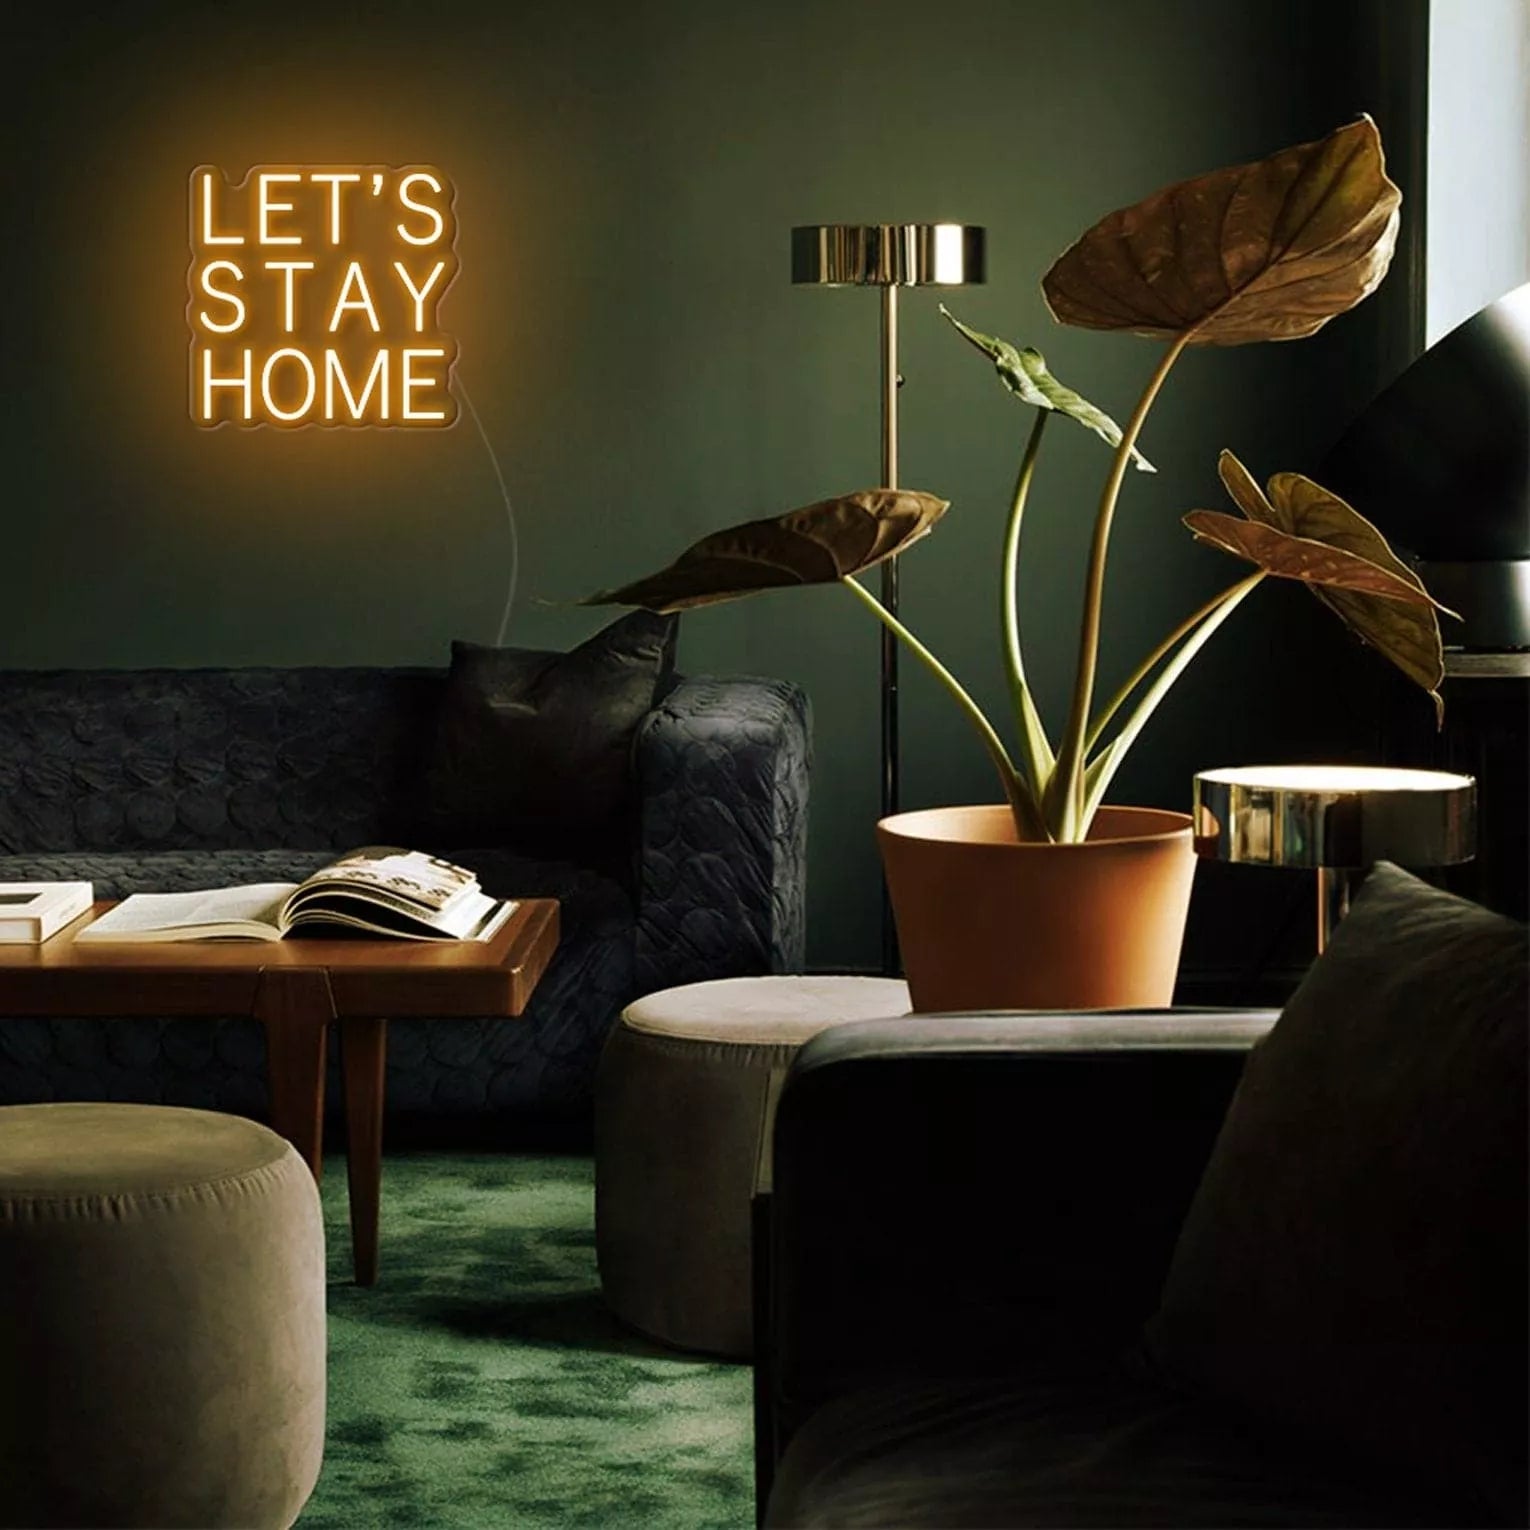 "LET'S STAY HOME" Neon Sign - NeonHub